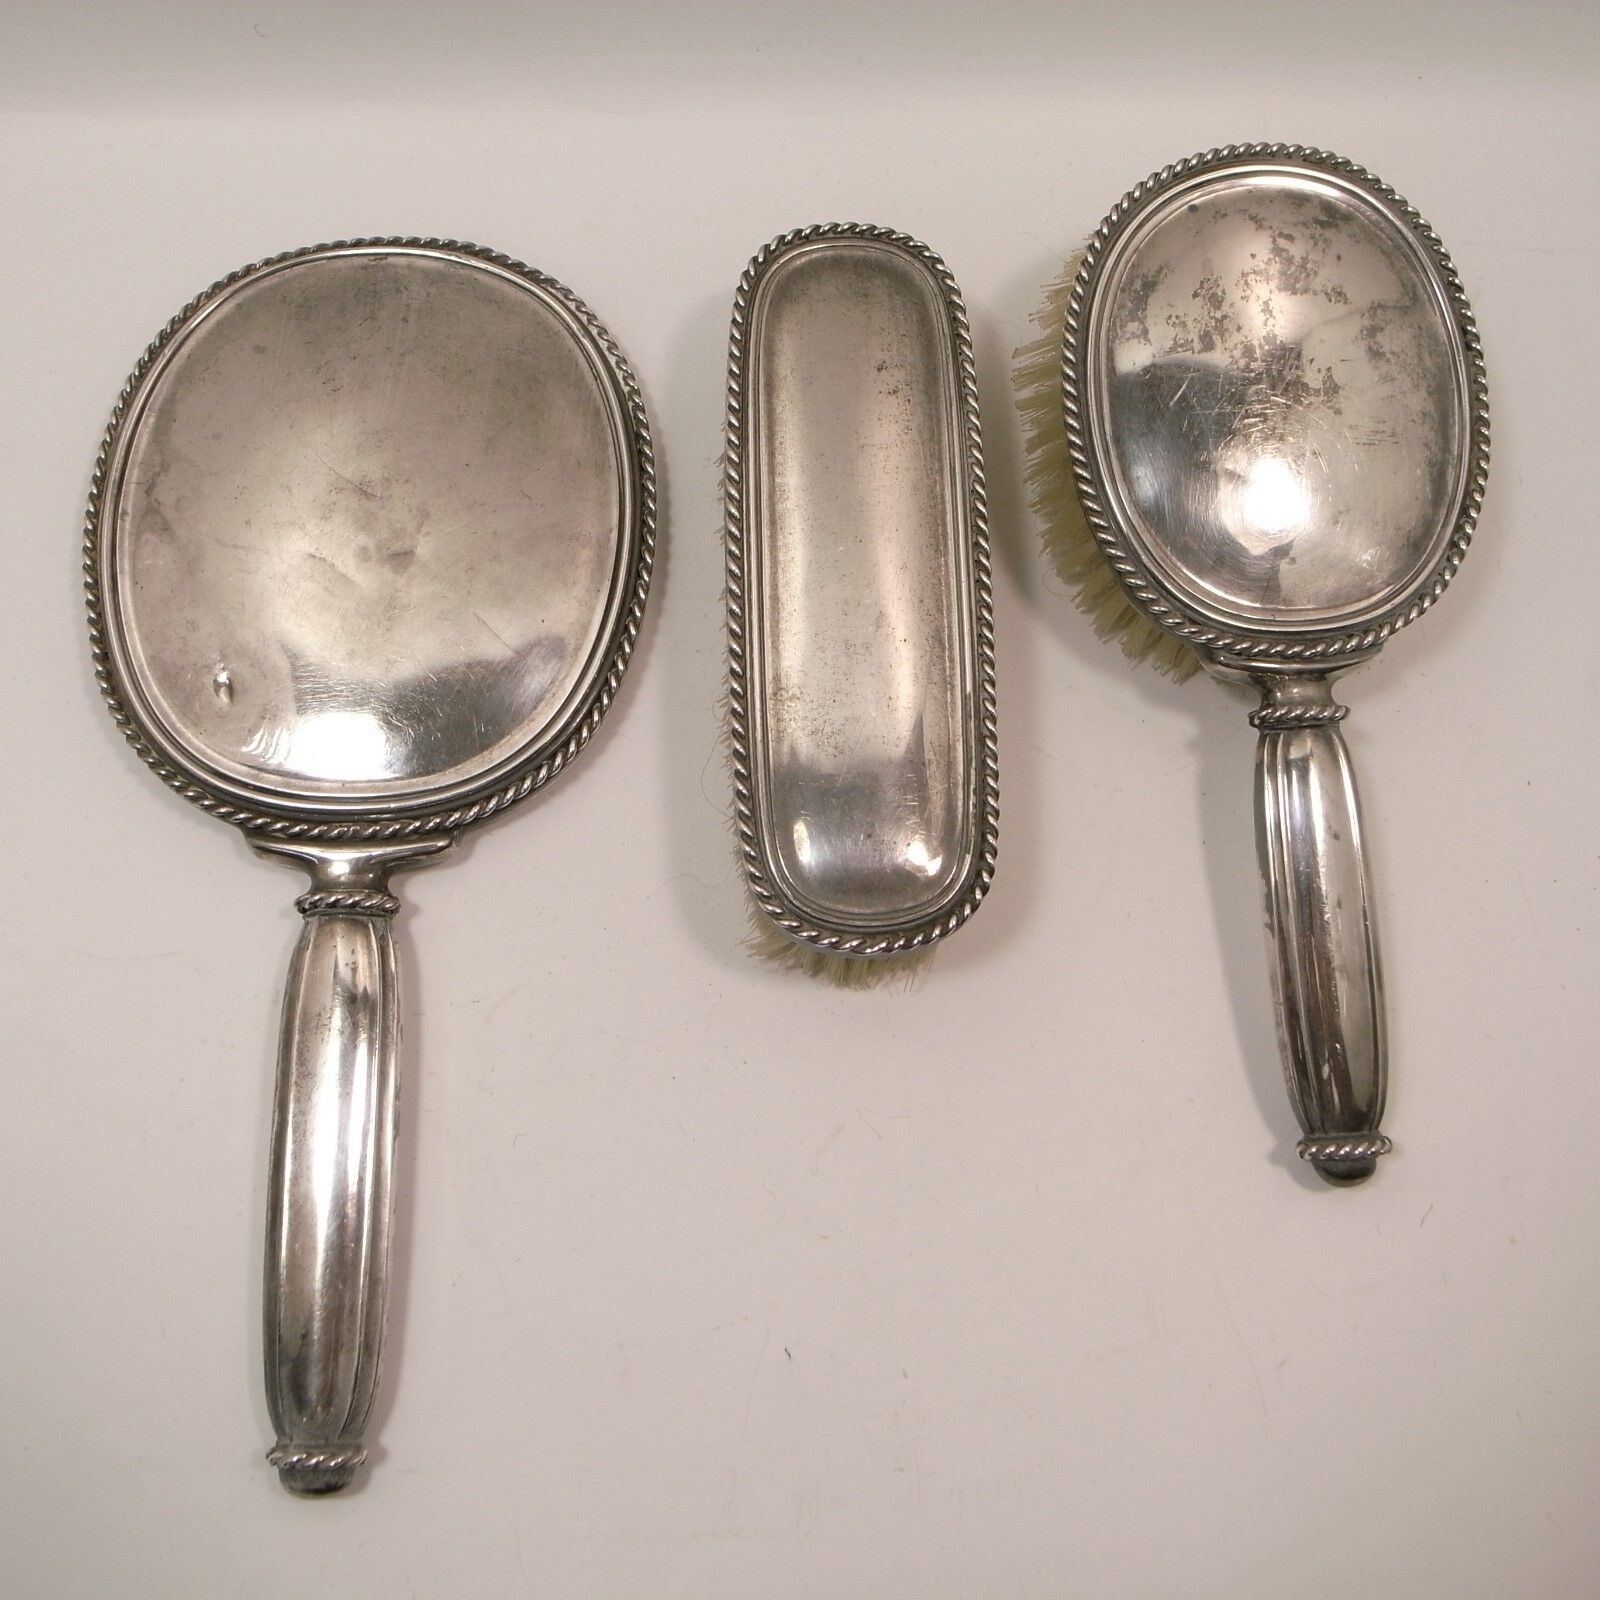 Belgian silver marked A835 three piece grooming set 10.25 in mirror c. 1942